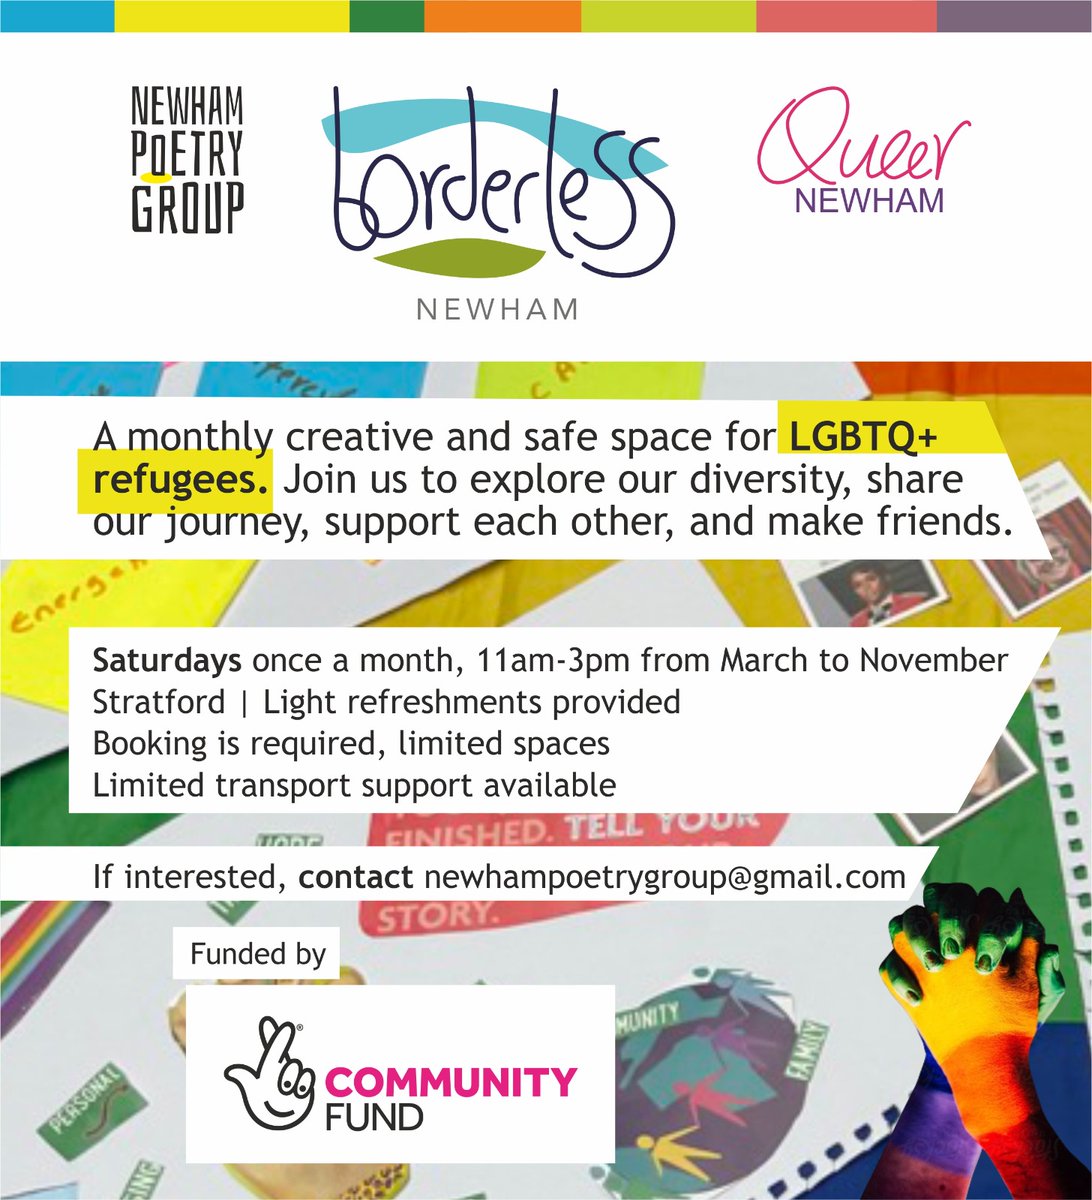 We are leading #LGBTQrefugees creative projects -  we'll be gathering on Saturdays once a month. Feel free to share the poster and invite LGBTQ+ friends and allies. #BorderlessGrp Thanks to
@TNLComFund